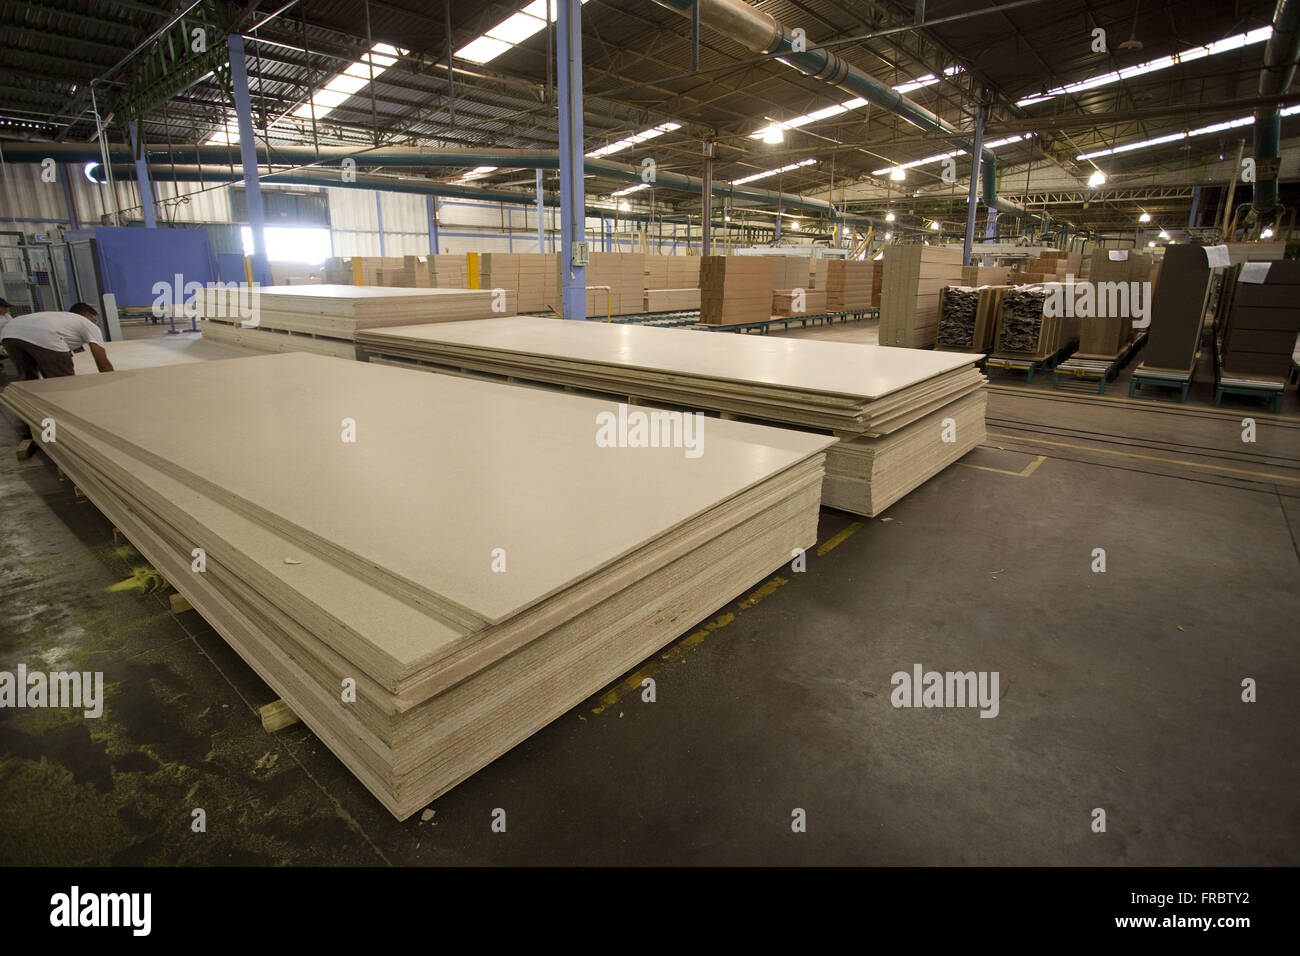 Shed of manufactures furniture with MDF wood boards Stock Photo